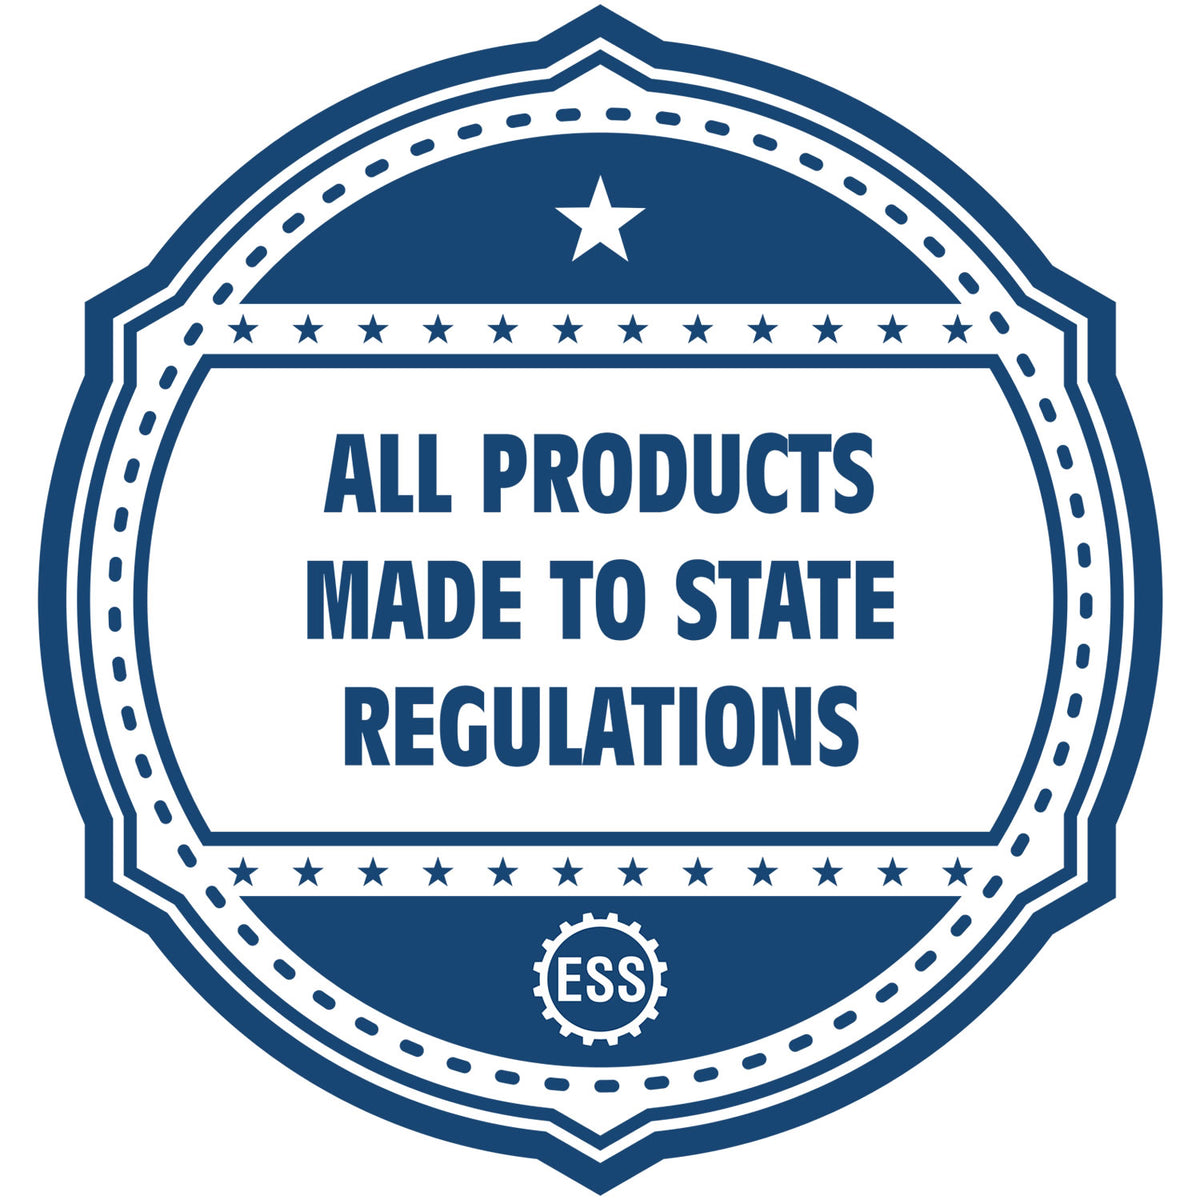 An icon or badge element for the Nevada Desk Architect Embossing Seal showing that this product is made in compliance with state regulations.